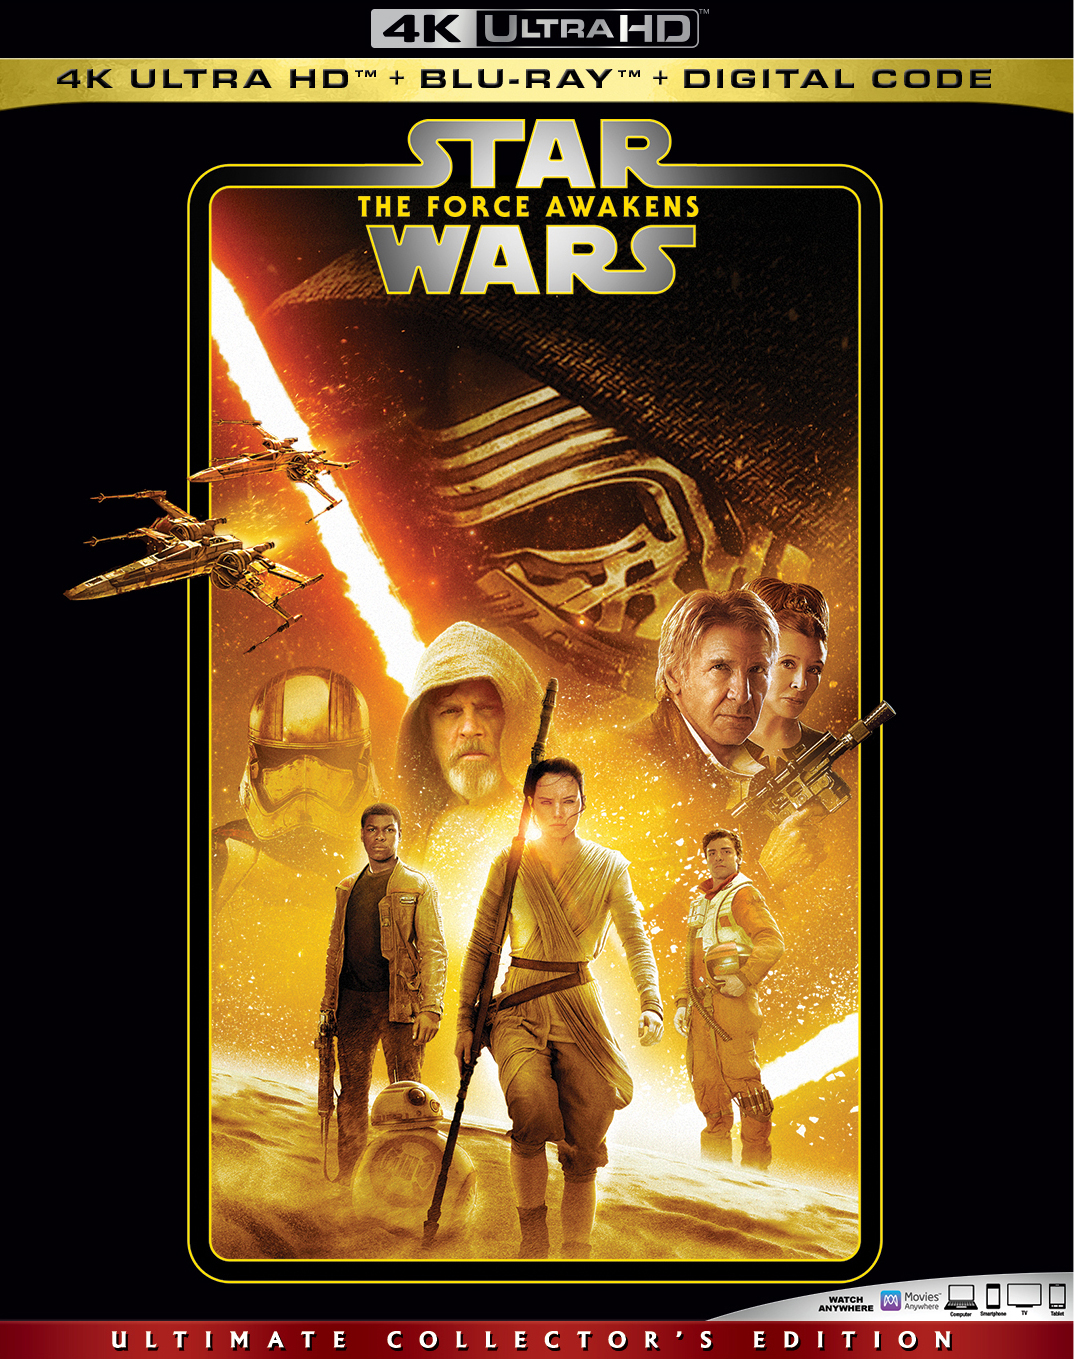 Watch Star Wars The Force Awakens 2015 Online Hd Full Movies